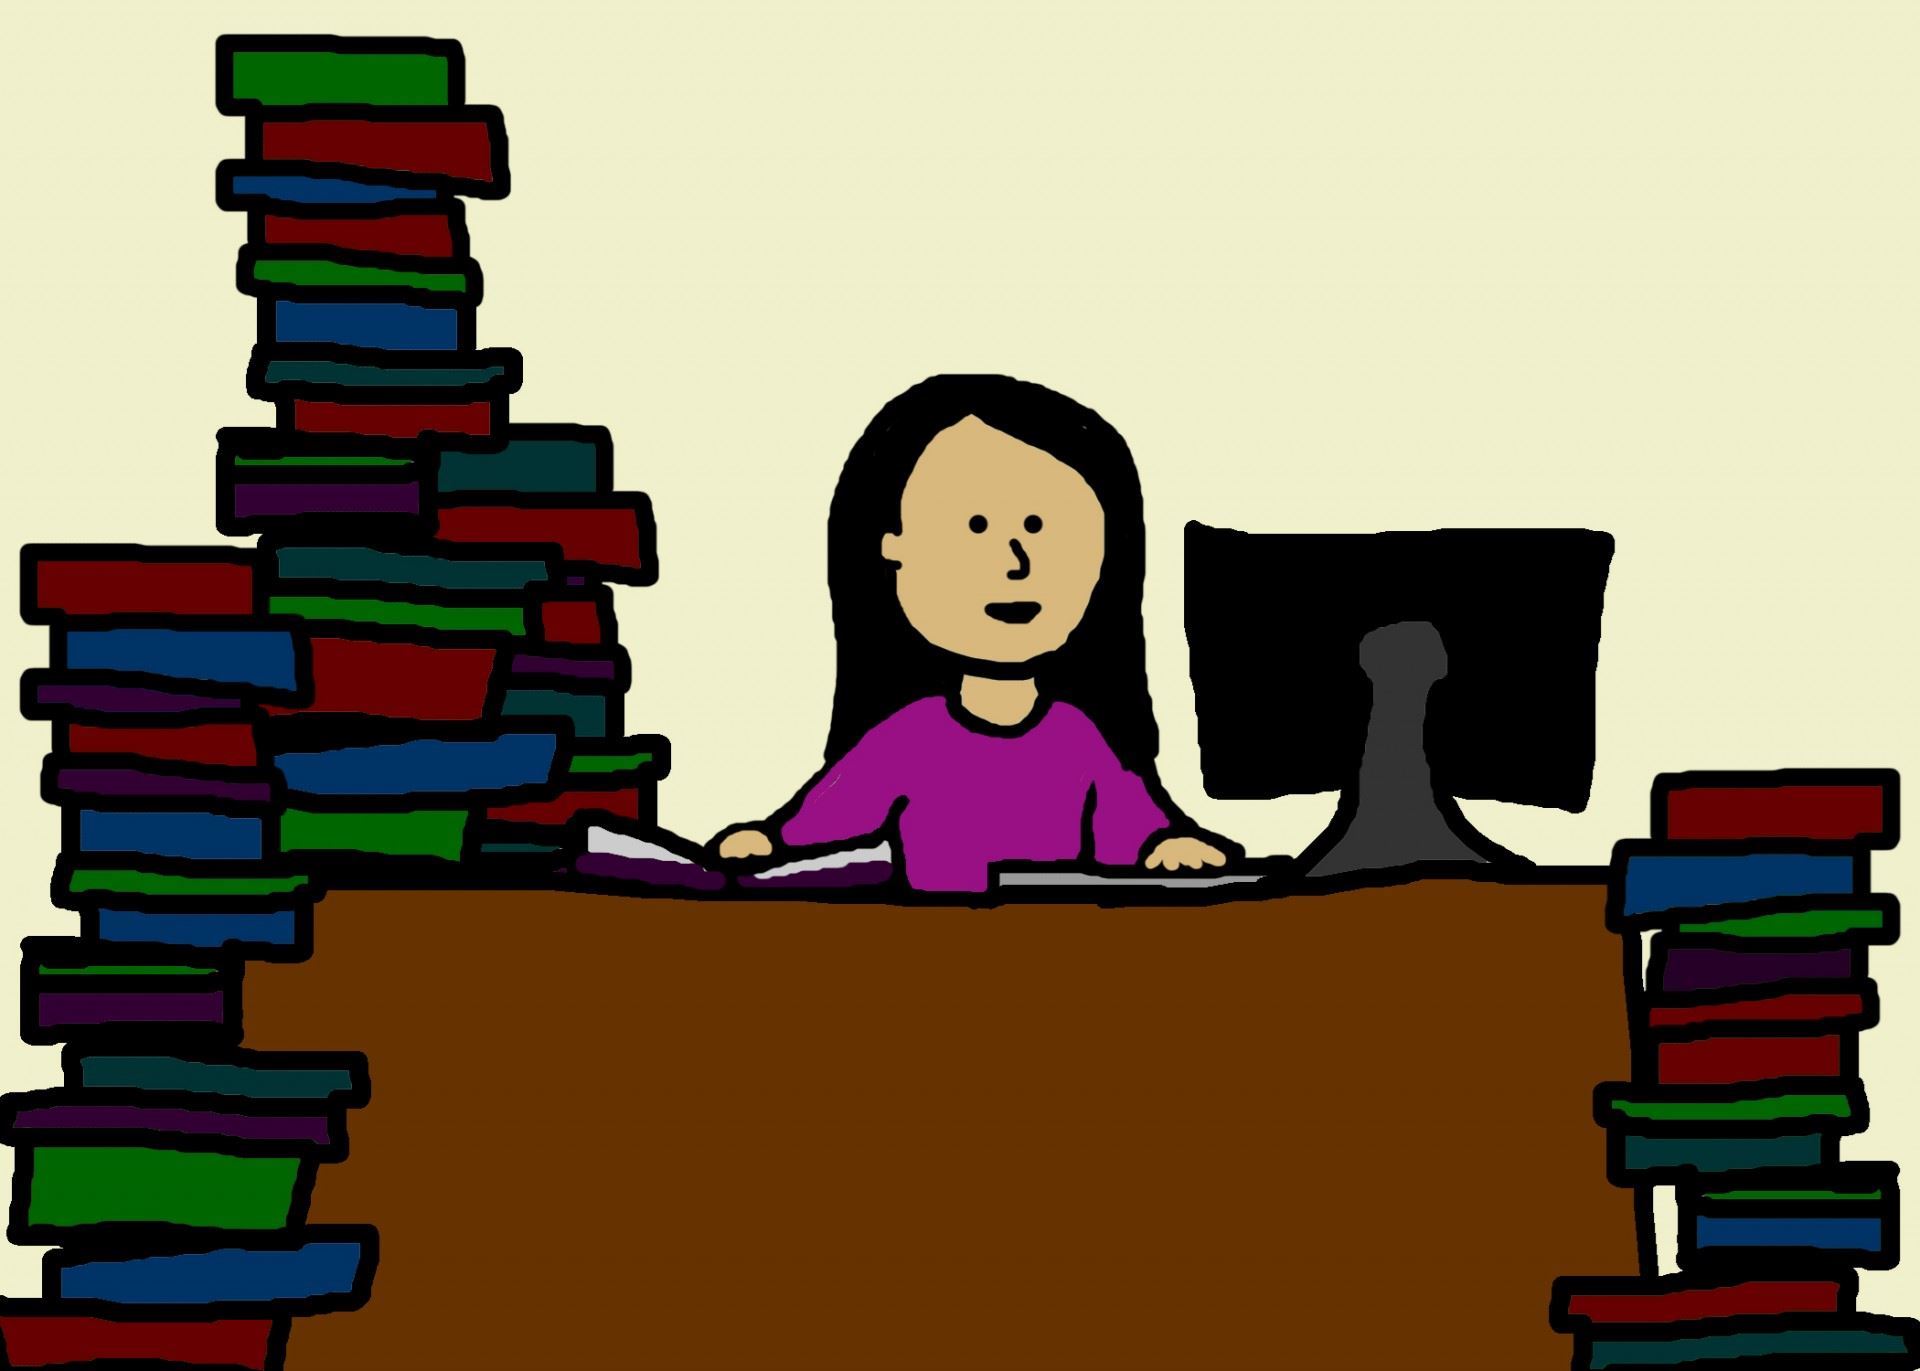 Woman with book piles. Image source www.publicdomainpictures.netview-image.phpimage=56136&picture=woman-studying-cartoon